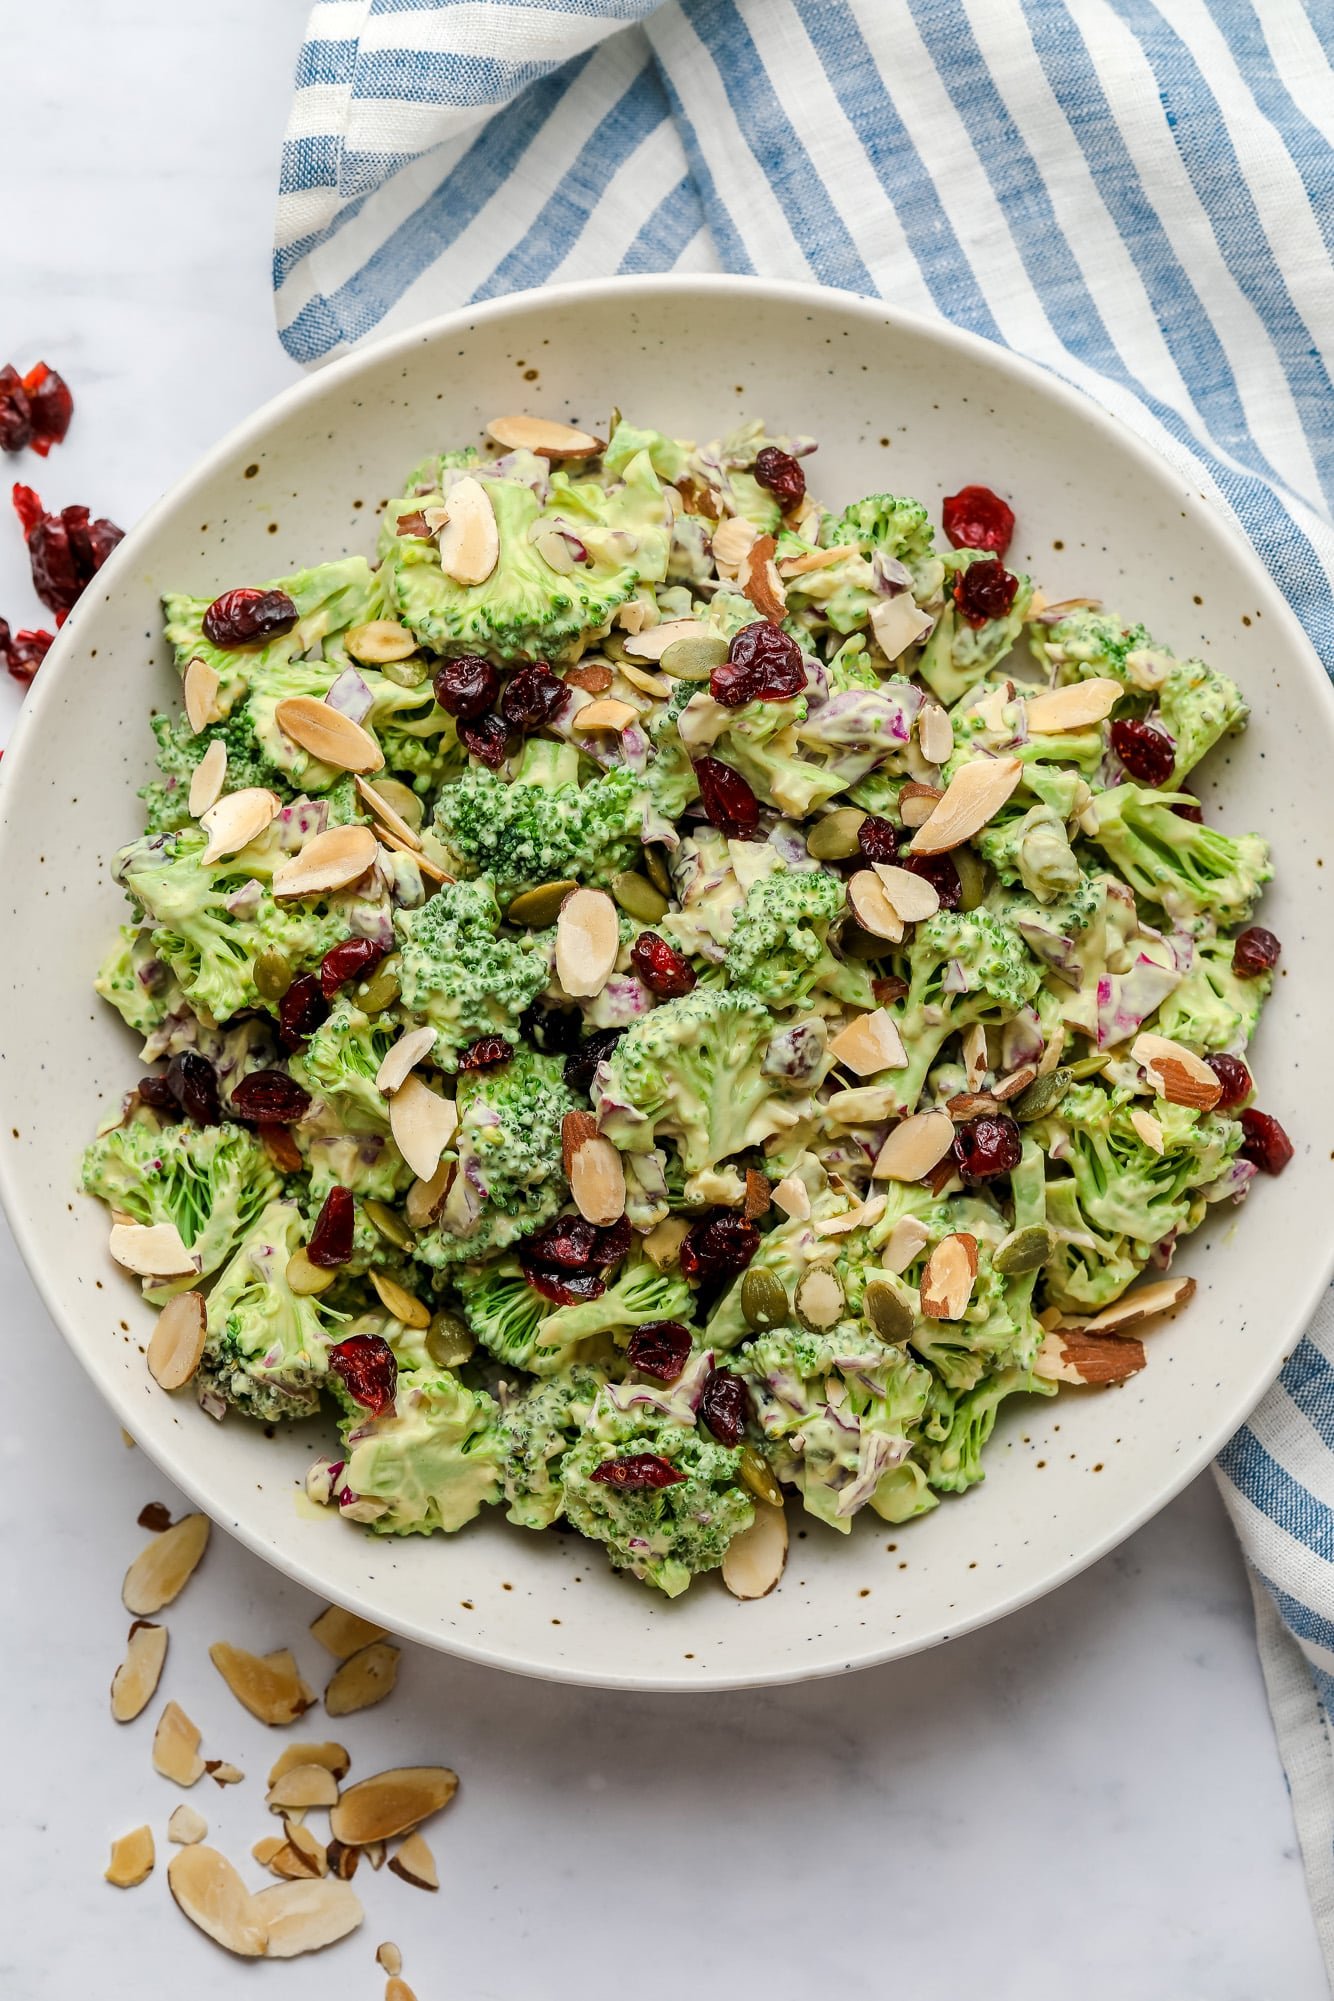 vegan broccoli salad tossed in creamy dressing and topped with almonds in a large white bowl.